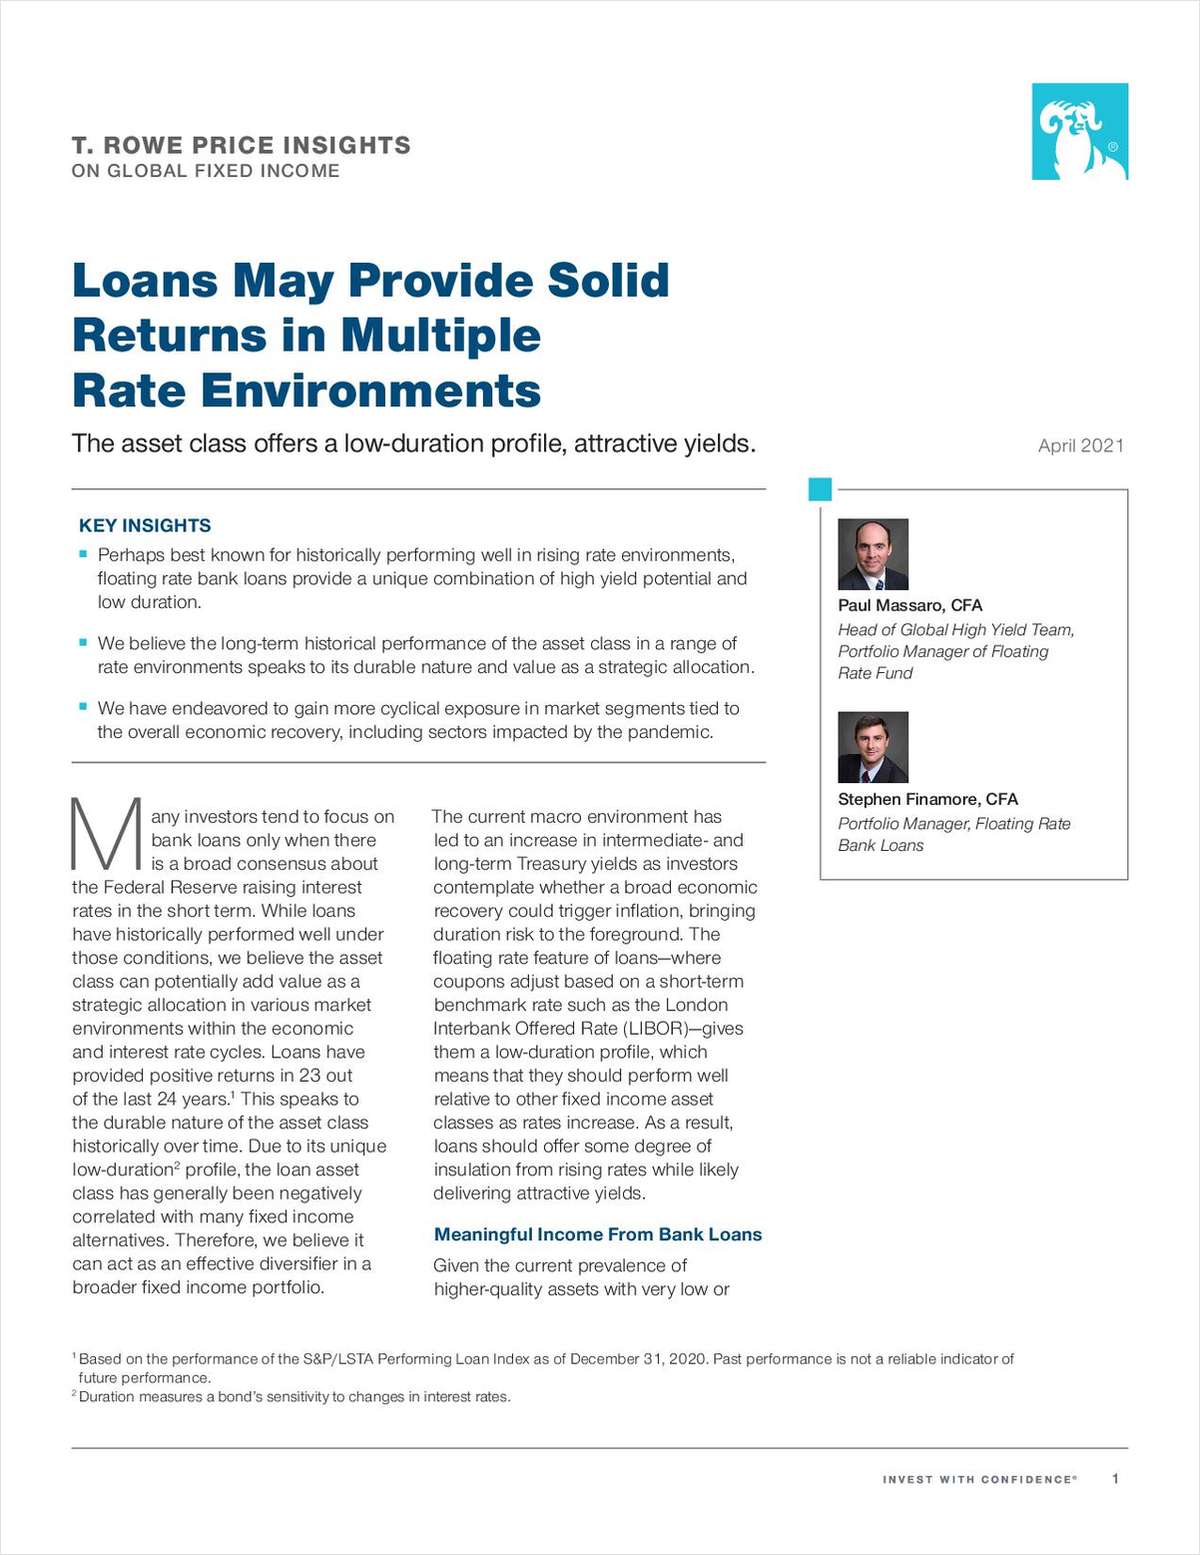 Loans May Provide Solid Returns in Multiple Rate Environments